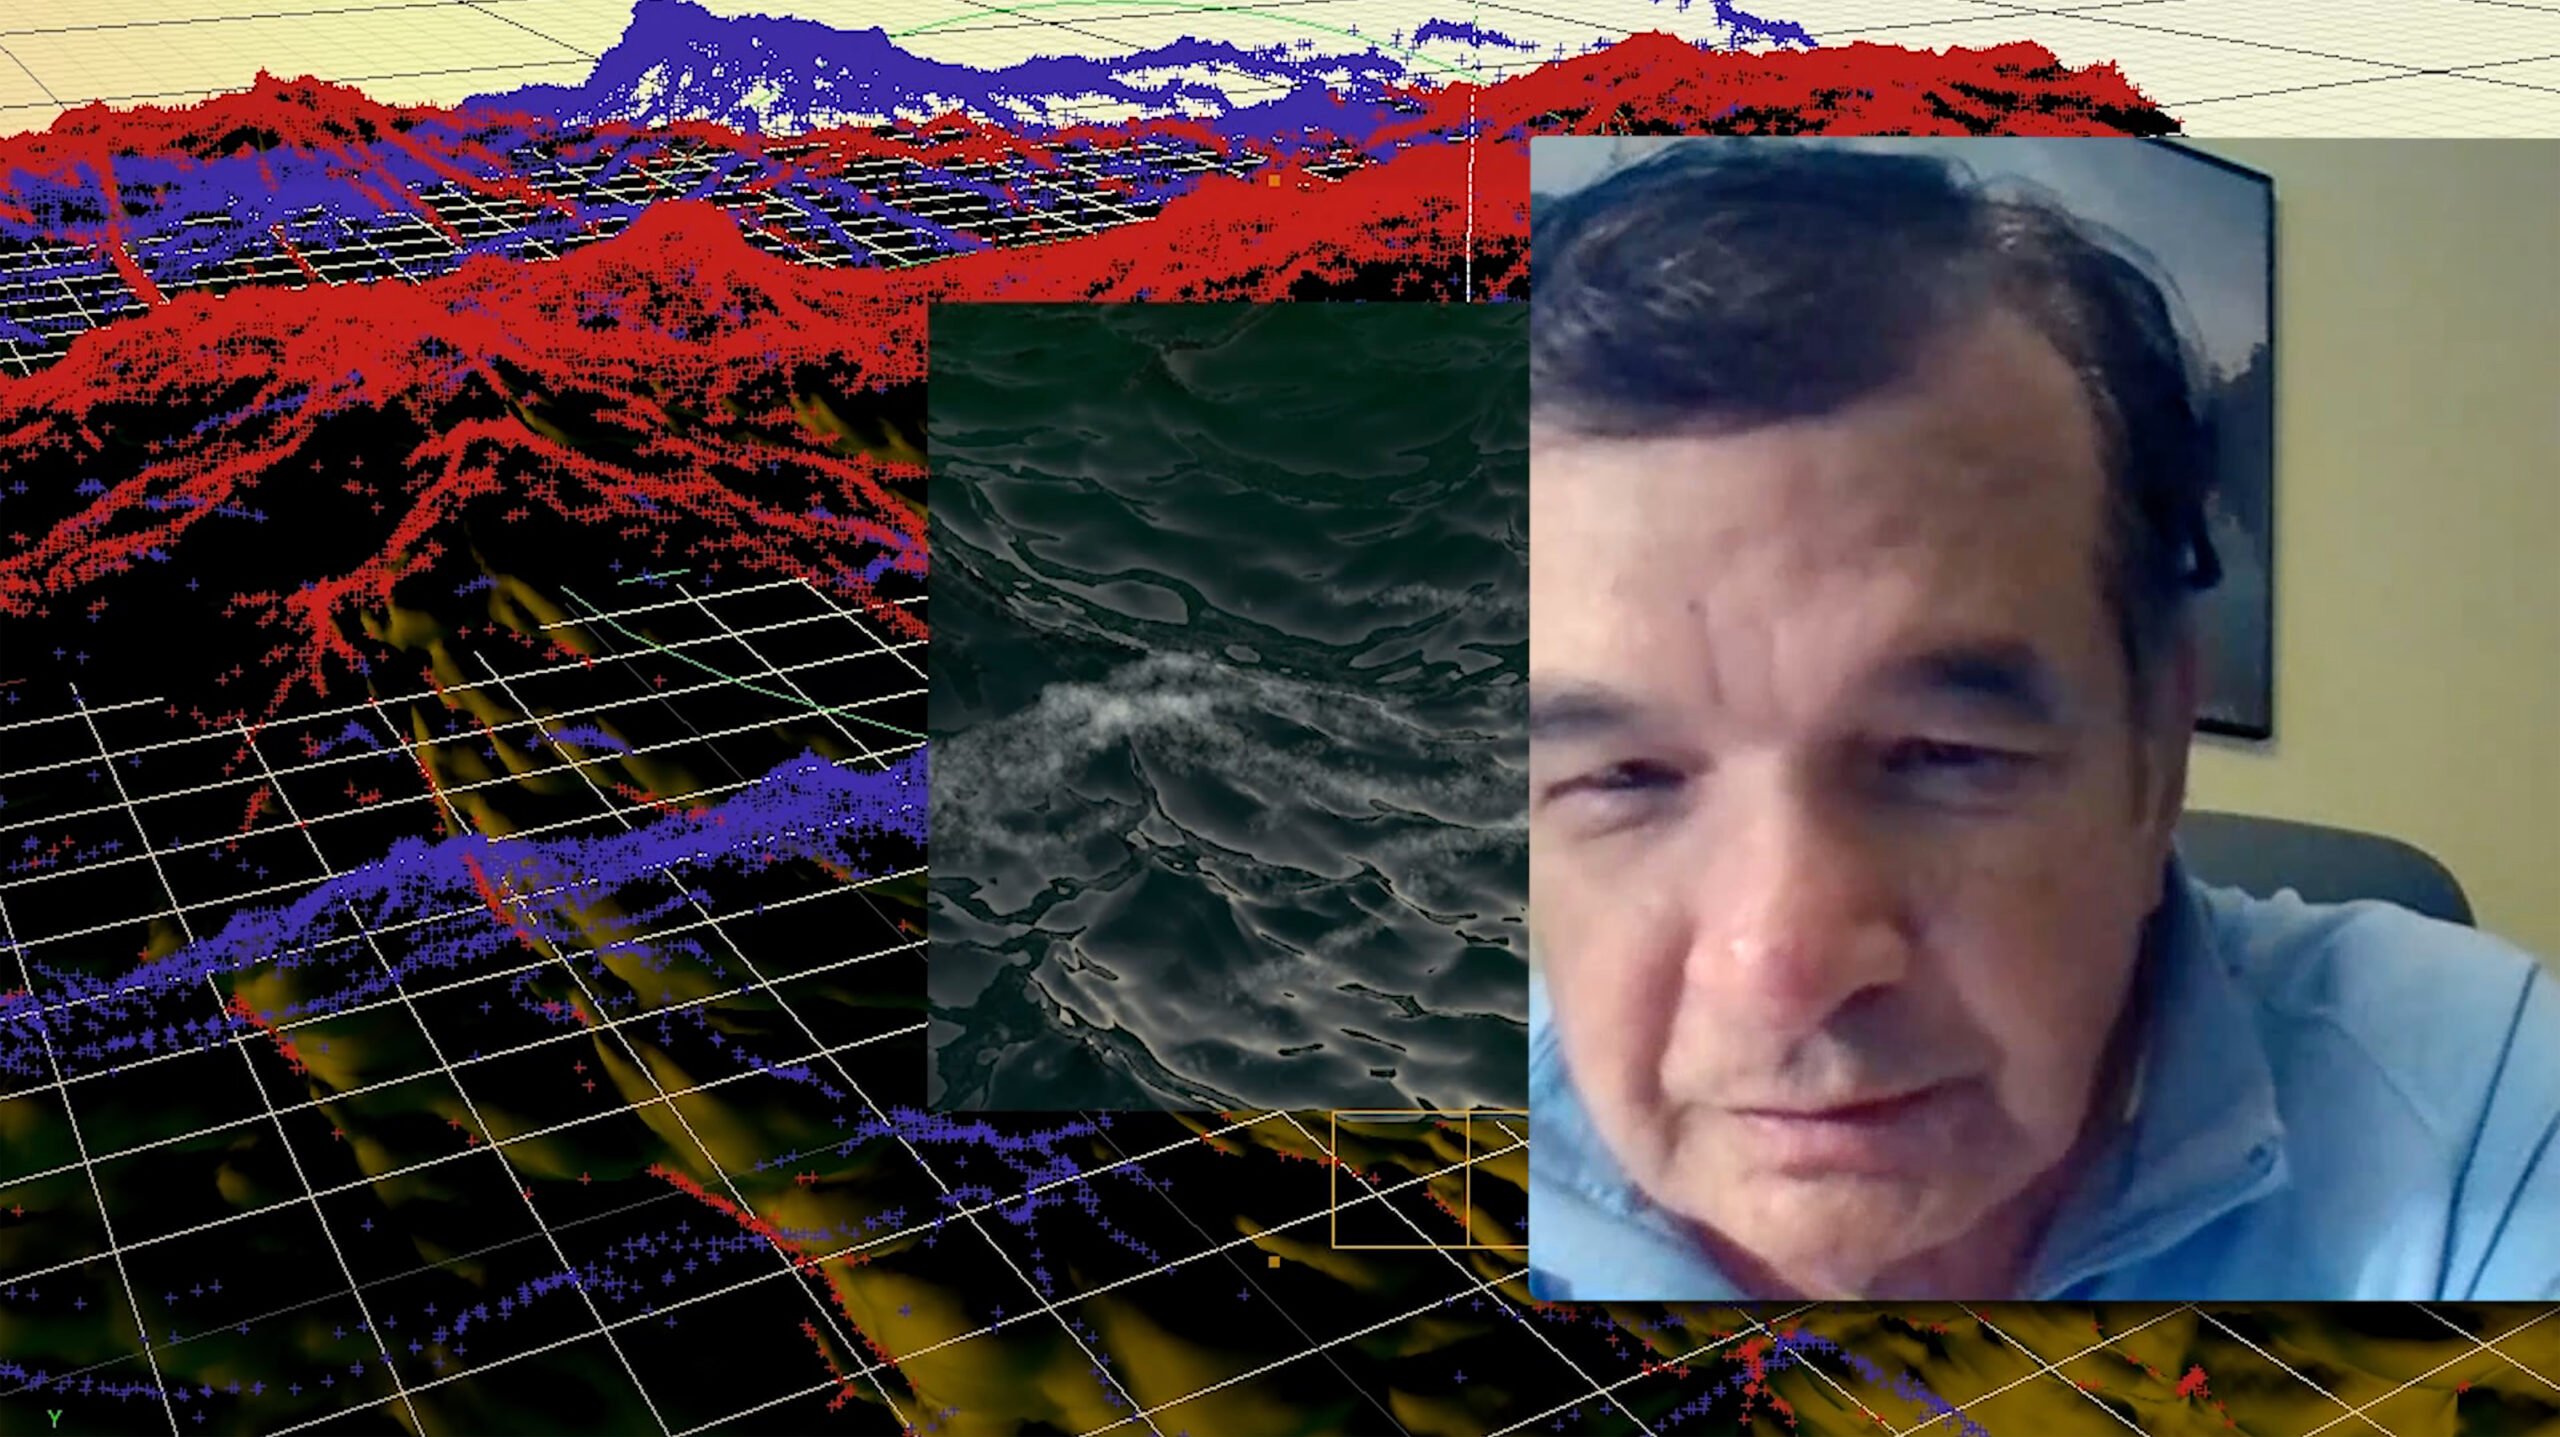 An colourful abstract vector landscape with grid overlays is in the background. Collaged on top of it are an inverted image of waves and an image of an older man gazing into the camera which looks like a screenshot from a video call.